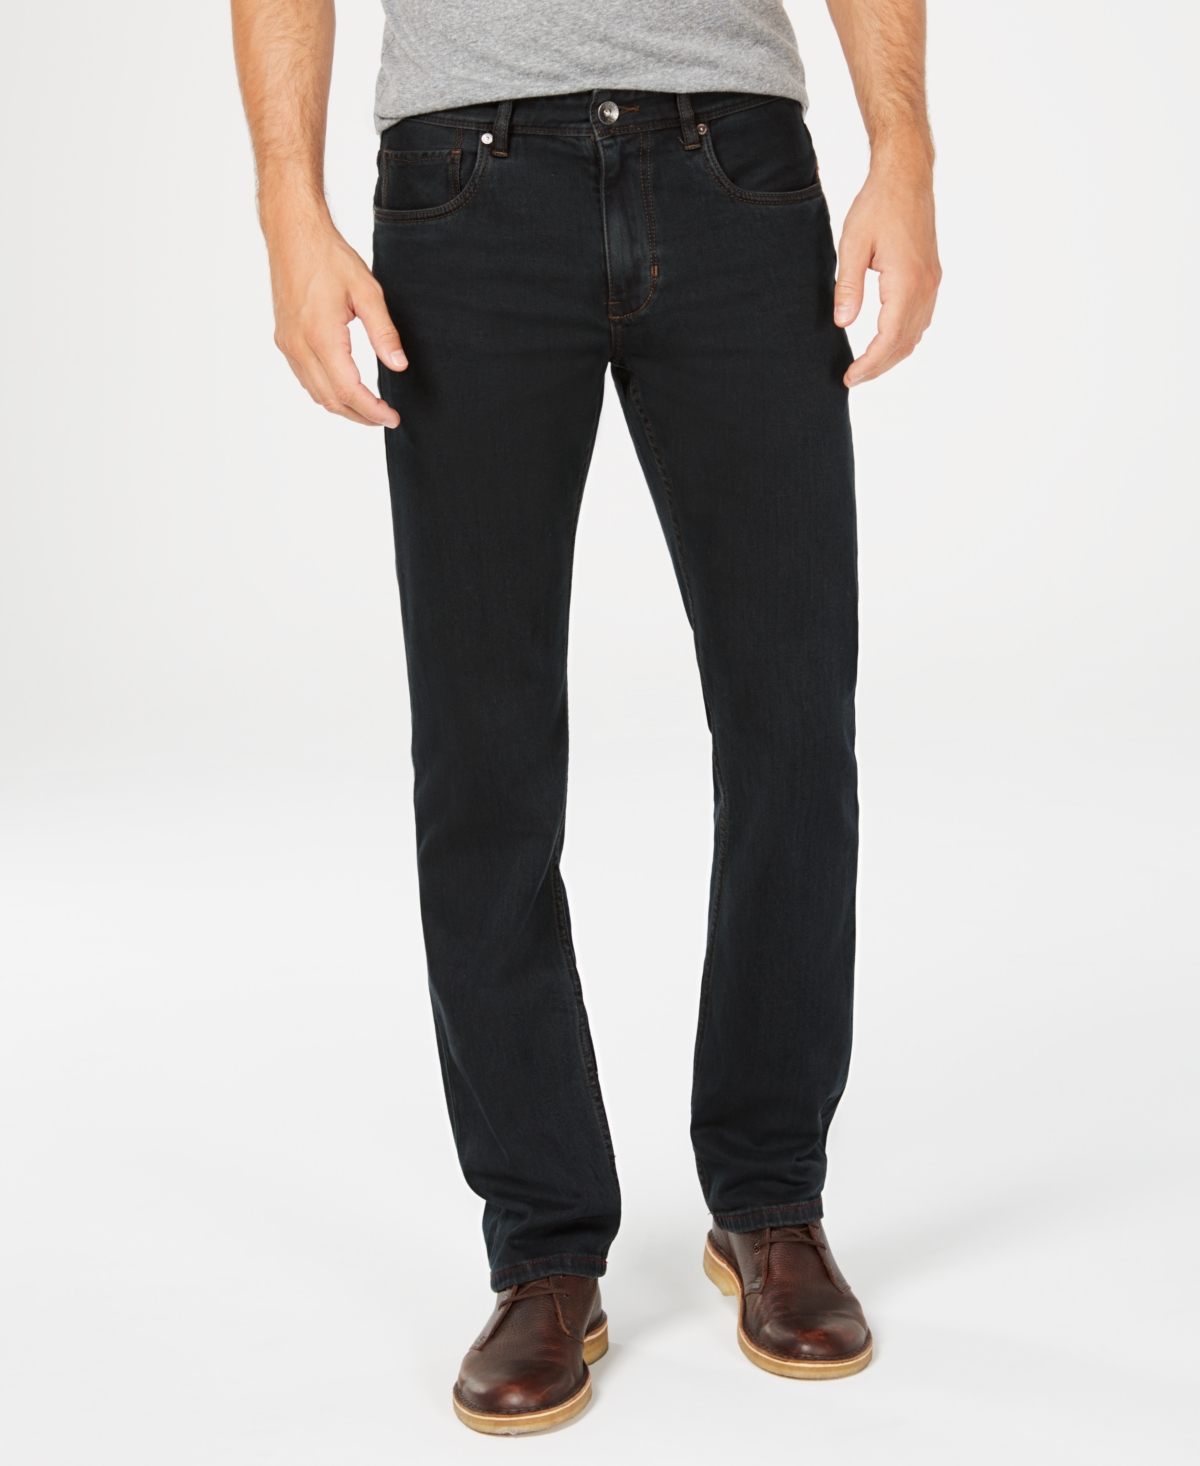 UPC 719260422445 product image for Tommy Bahama Men's Antigua Cove Authentic Fit Jeans | upcitemdb.com